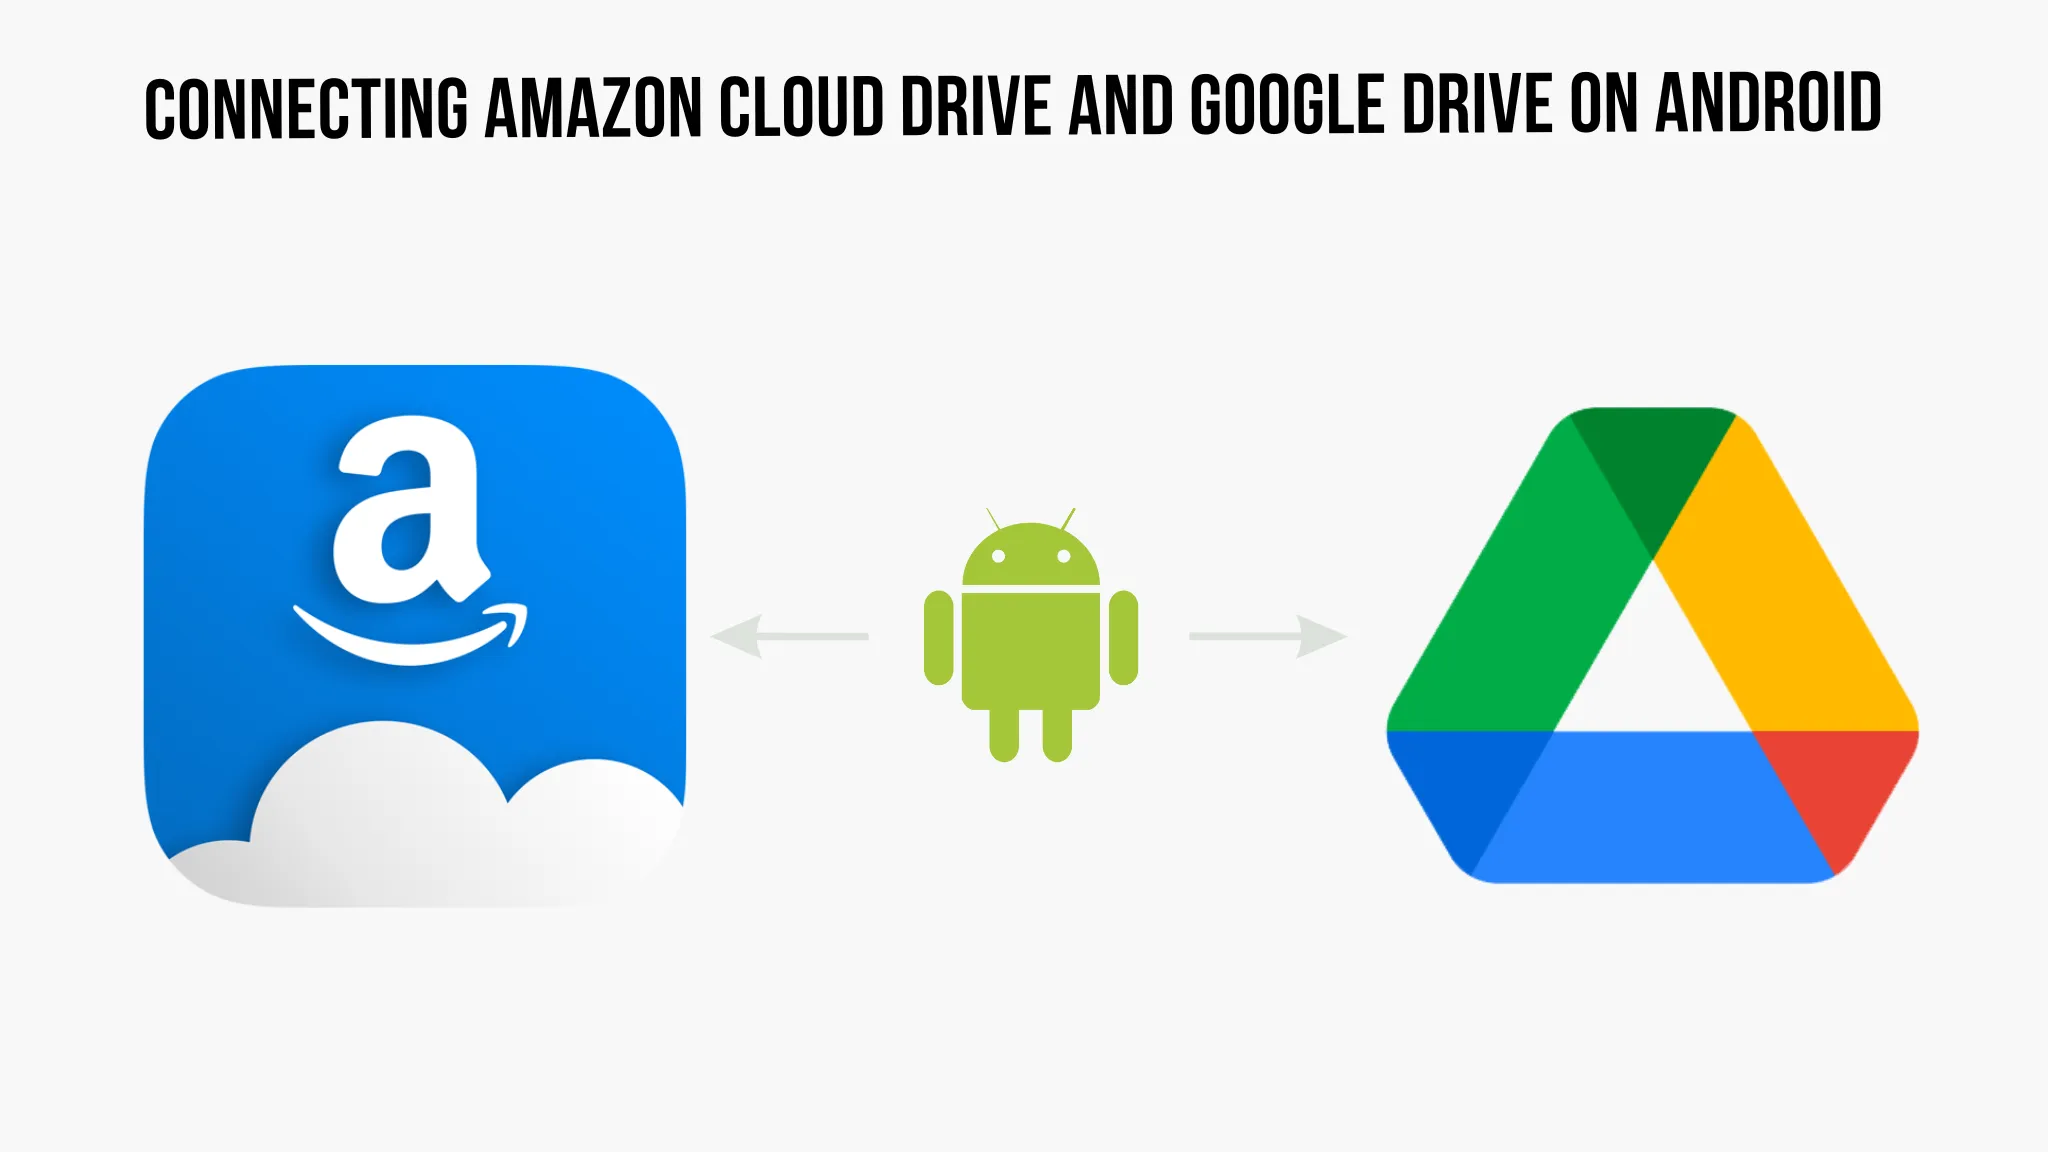 Connecting Amazon Cloud Drive and Google Drive on Android